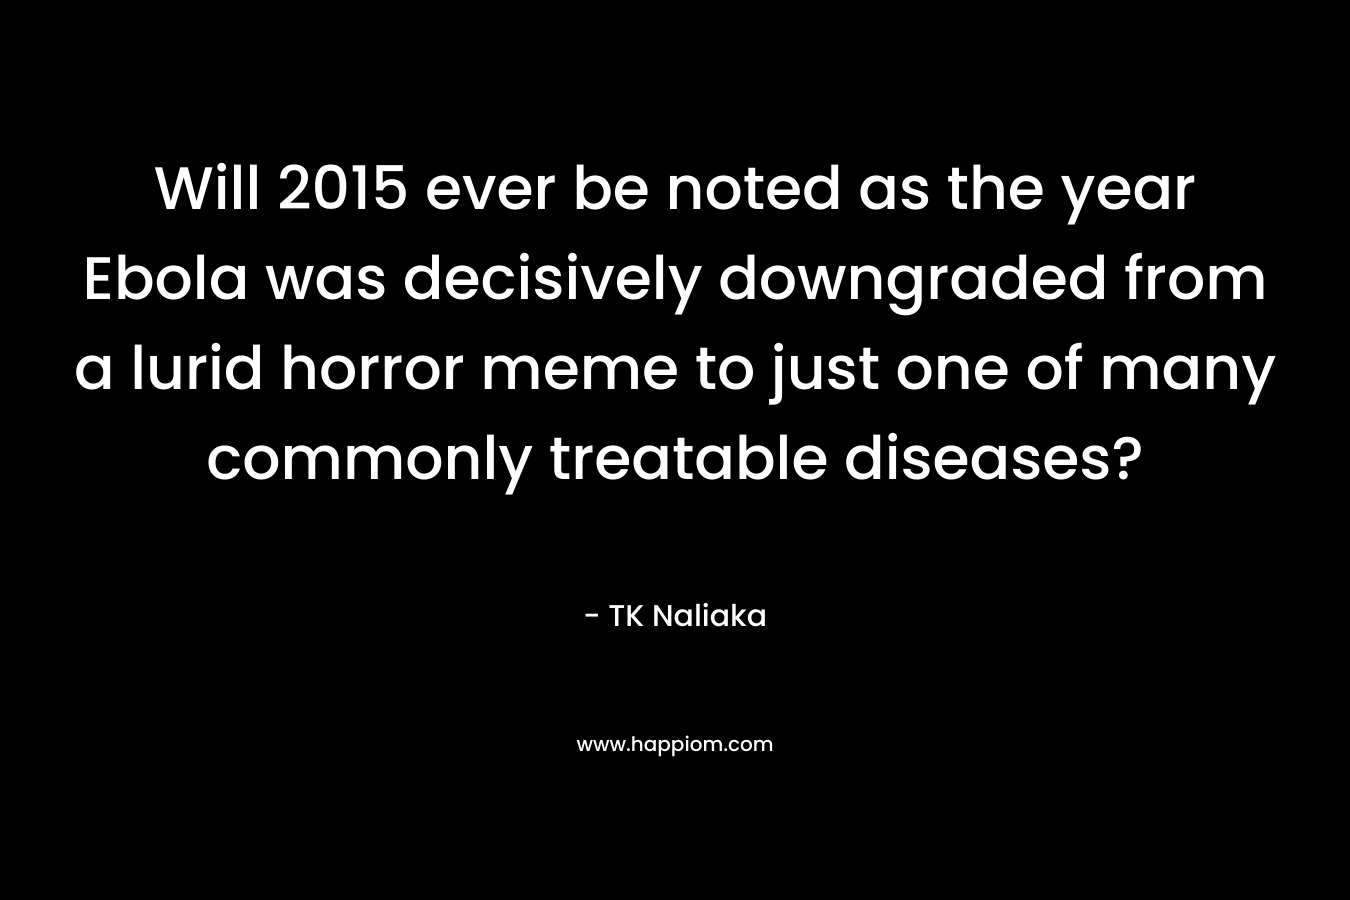 Will 2015 ever be noted as the year Ebola was decisively downgraded from a lurid horror meme to just one of many commonly treatable diseases? – TK Naliaka